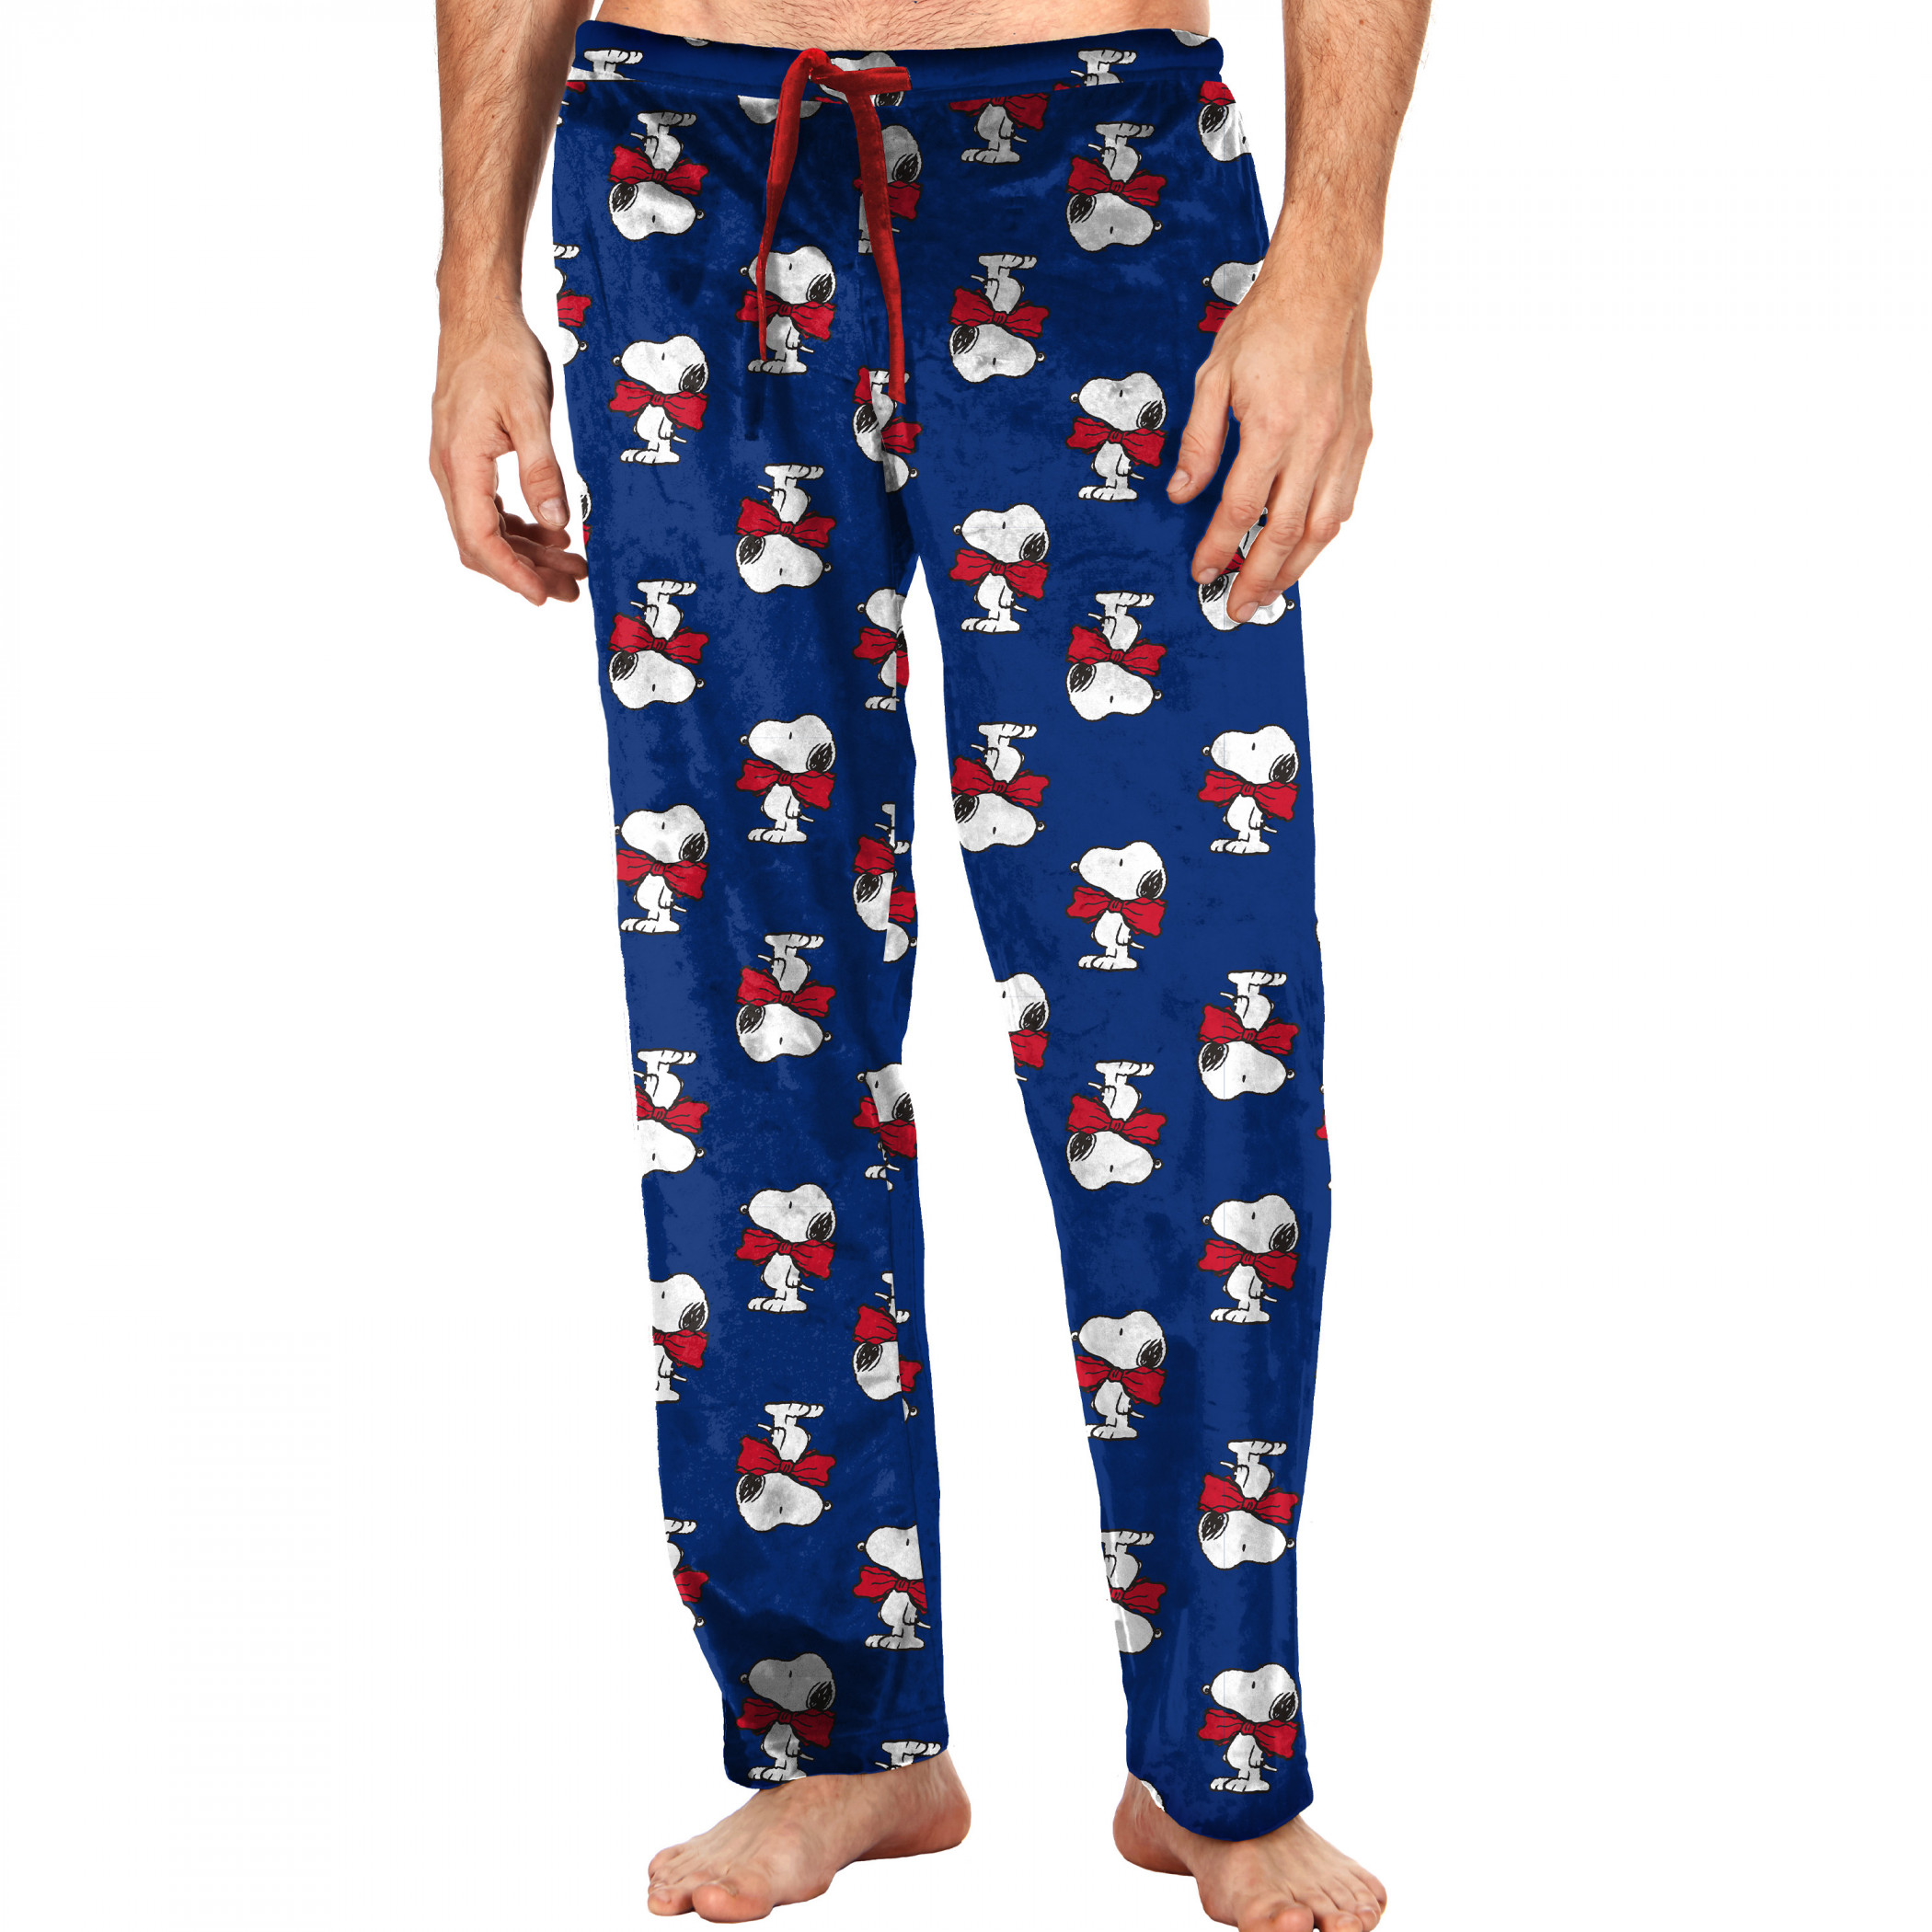 Peanuts Snoopy with a Big Red Bow Sleep Pants Blue